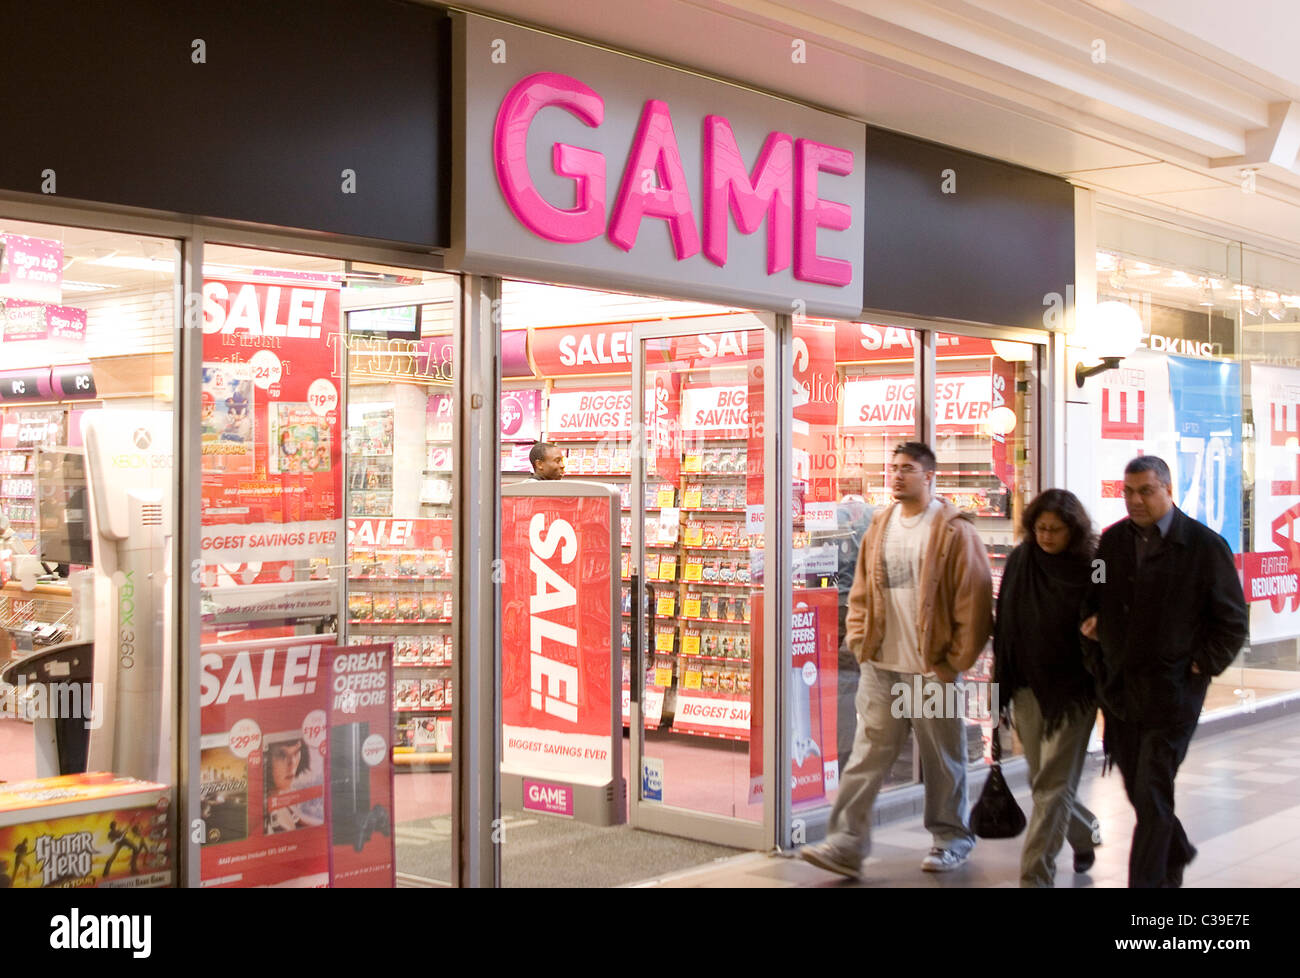 A Game store in North London Stock Photo